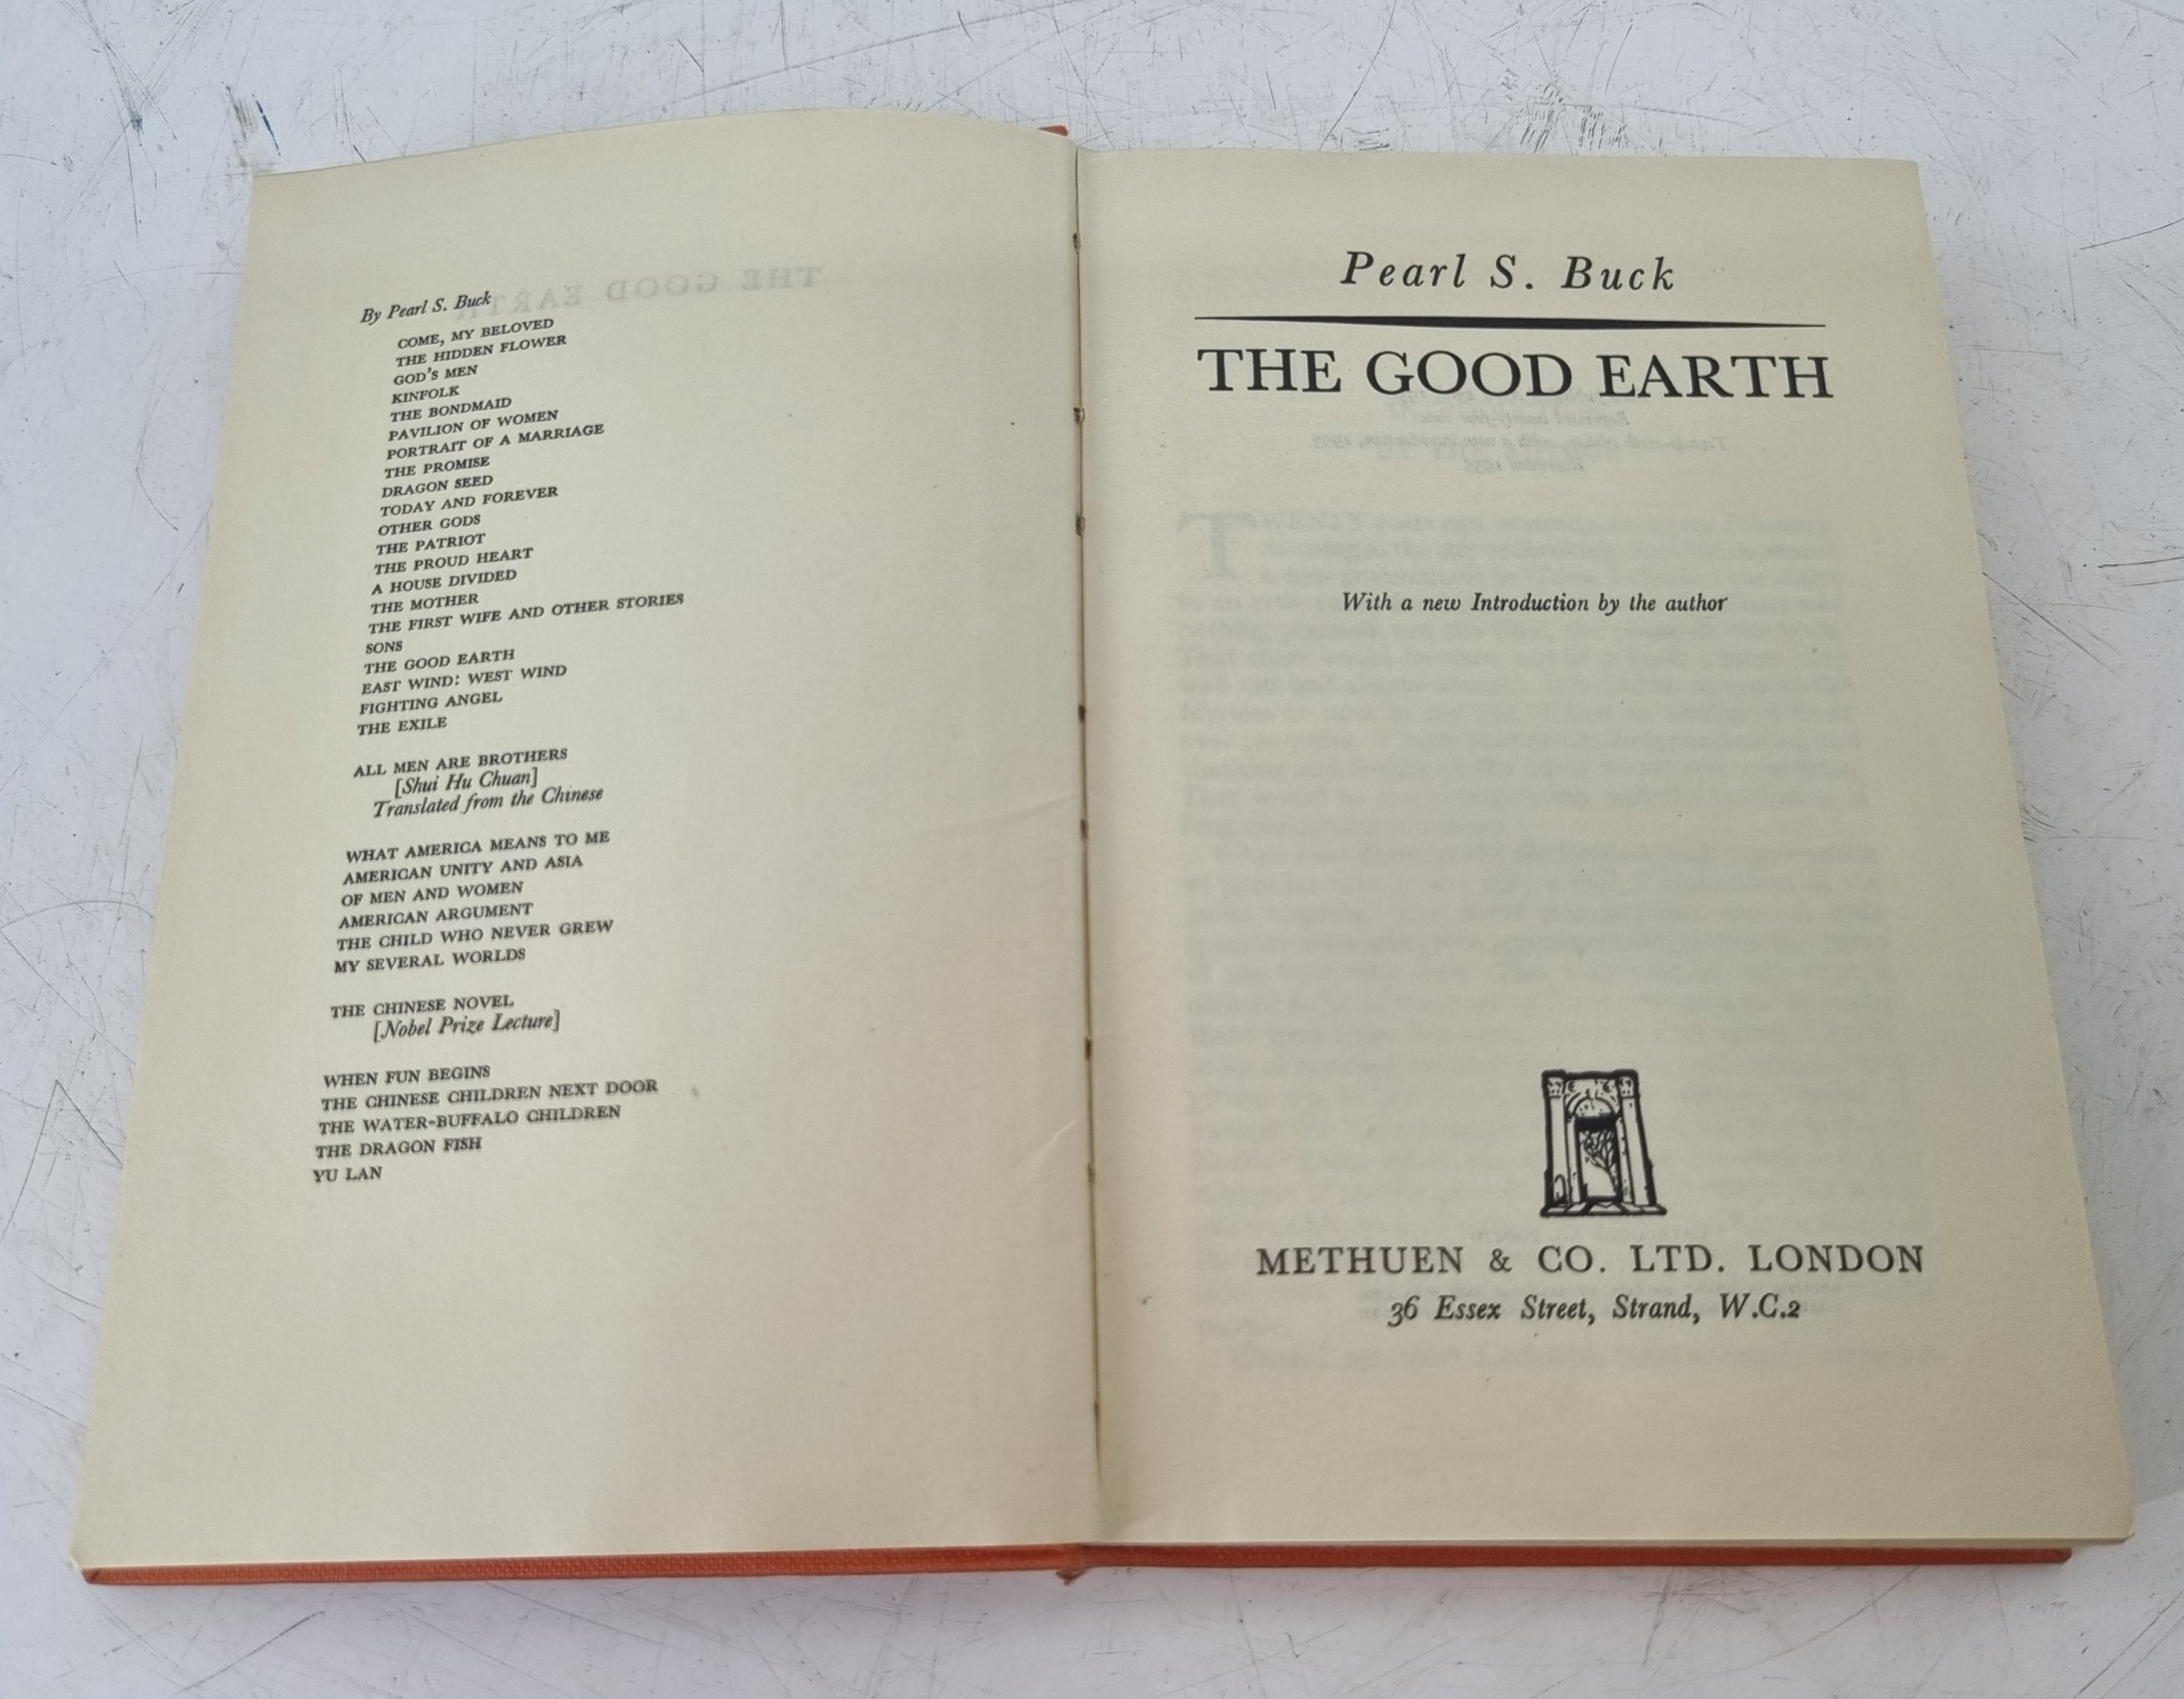 The Good Earth by Pearl S Buck - Published Norwich 1955, The Countryside Companion by Tom Stephenson - Image 8 of 13